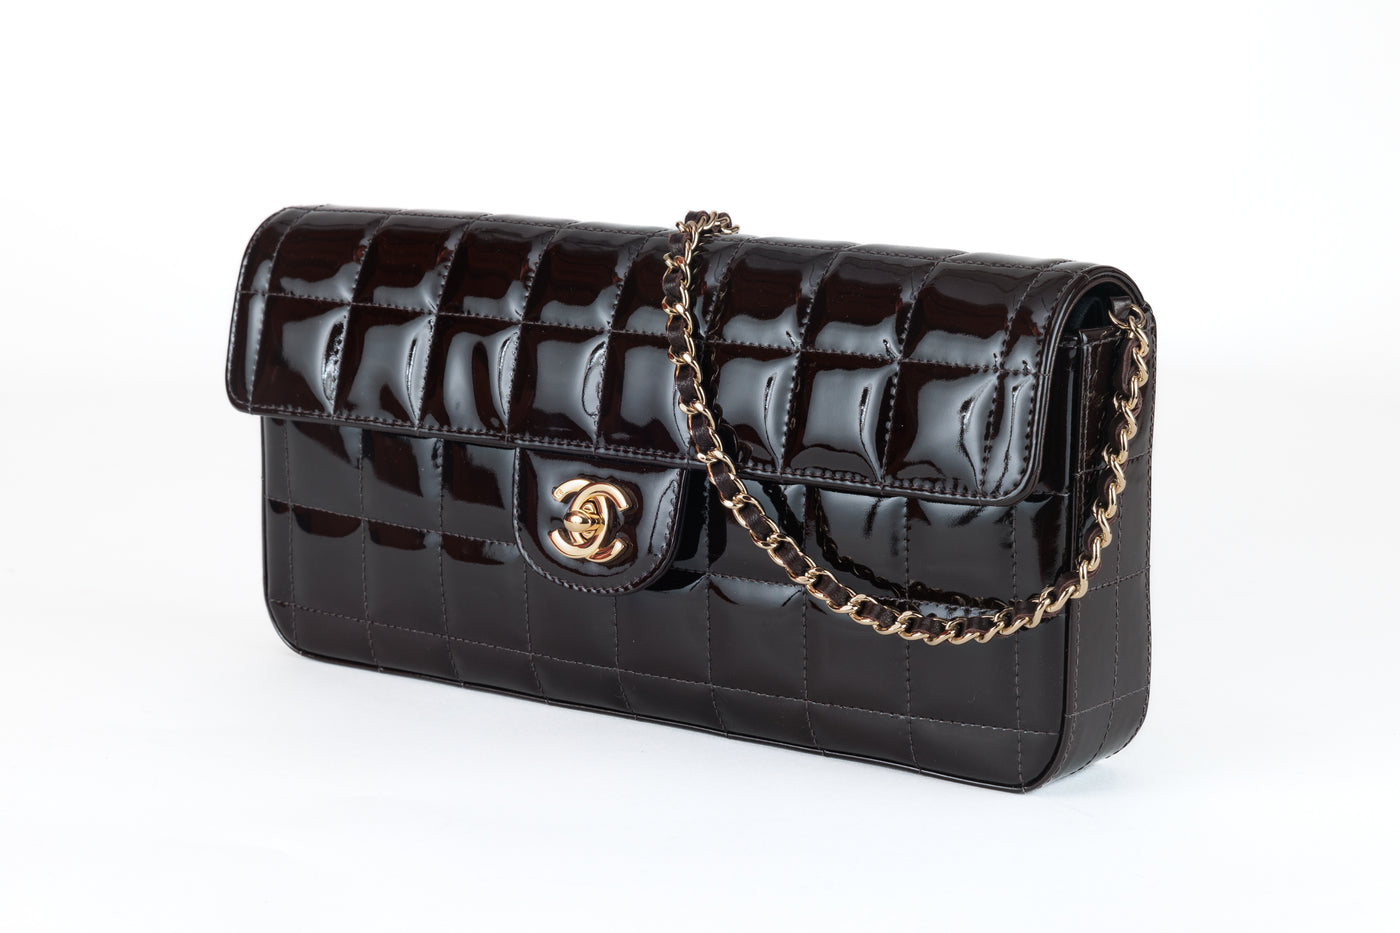 Chanel Brown Patent Leather  Chocolate Bar East West Flap Bag with Gold Hardware